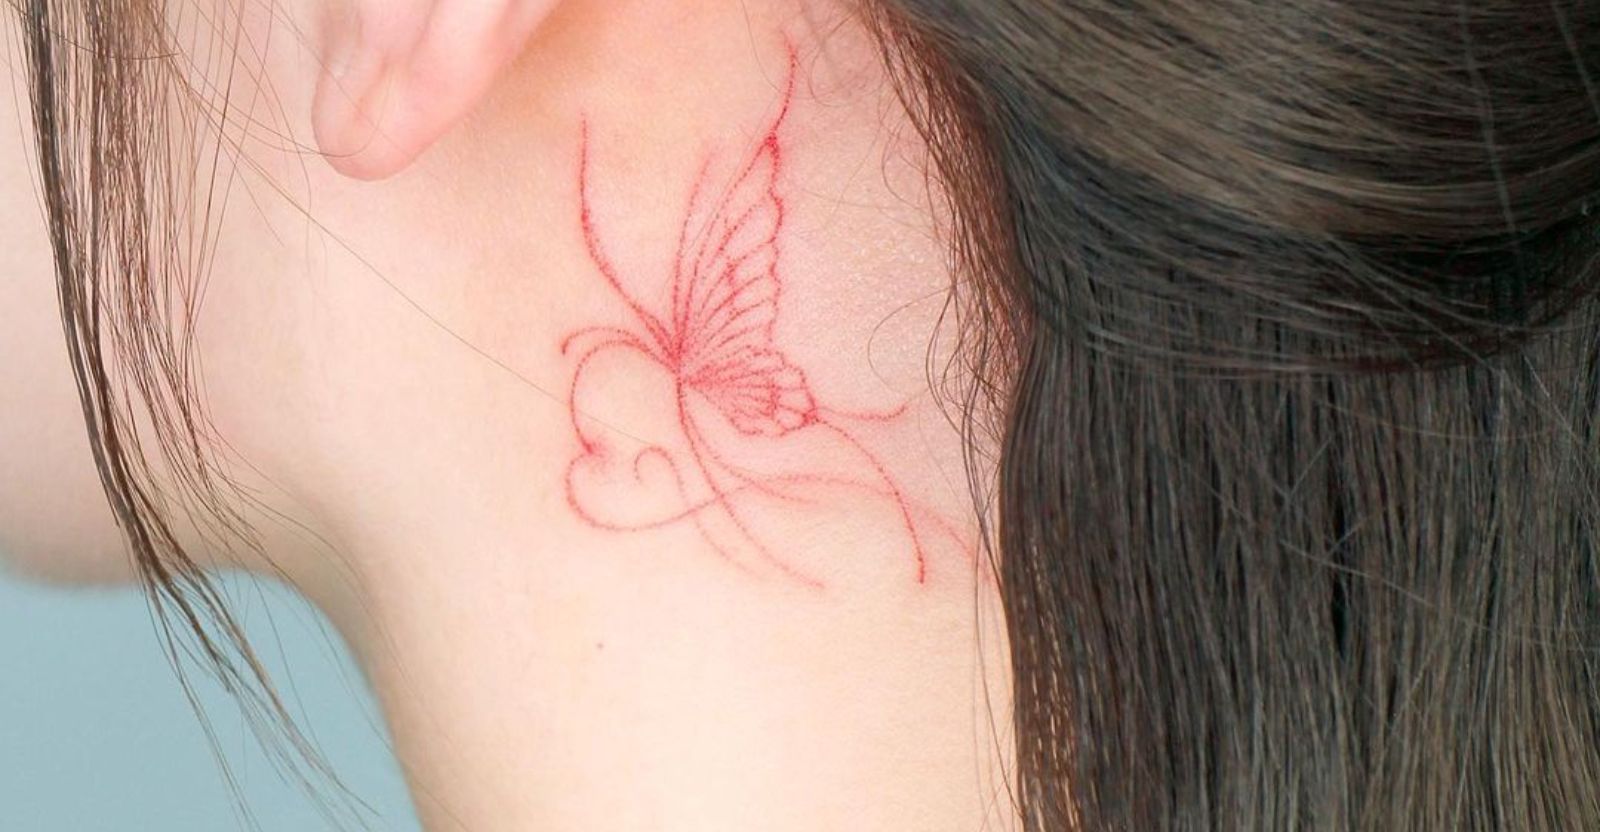 22 Popular Tattoo Styles, From Hearts to Hand-Poked